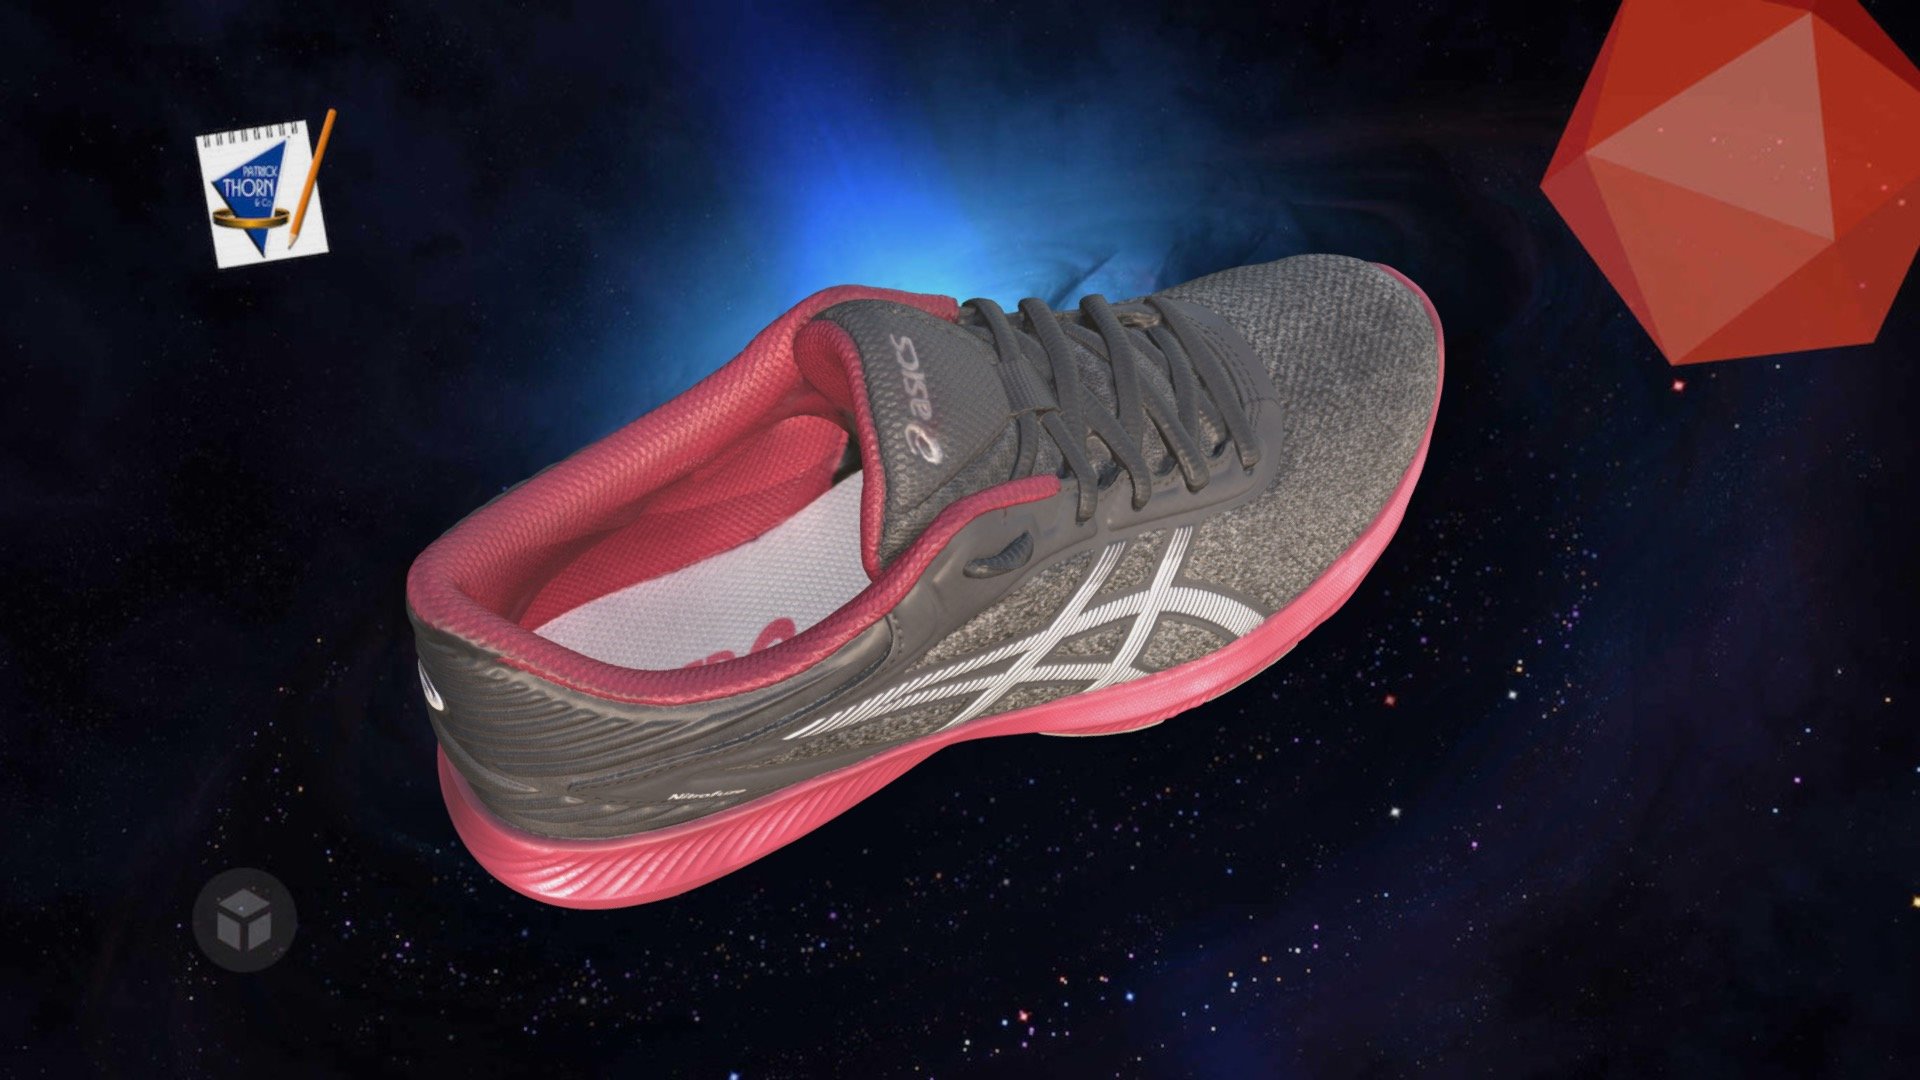 Scanned with Artec Space Spider.
Top then 2 sides of the sole, like in this video https://www.youtube.com/watch?v=vtXV17Ehz14 - Asics Pink Shoe - Space Spider - 3D model by Patrick Thorn (@patrickthorn) 3d model